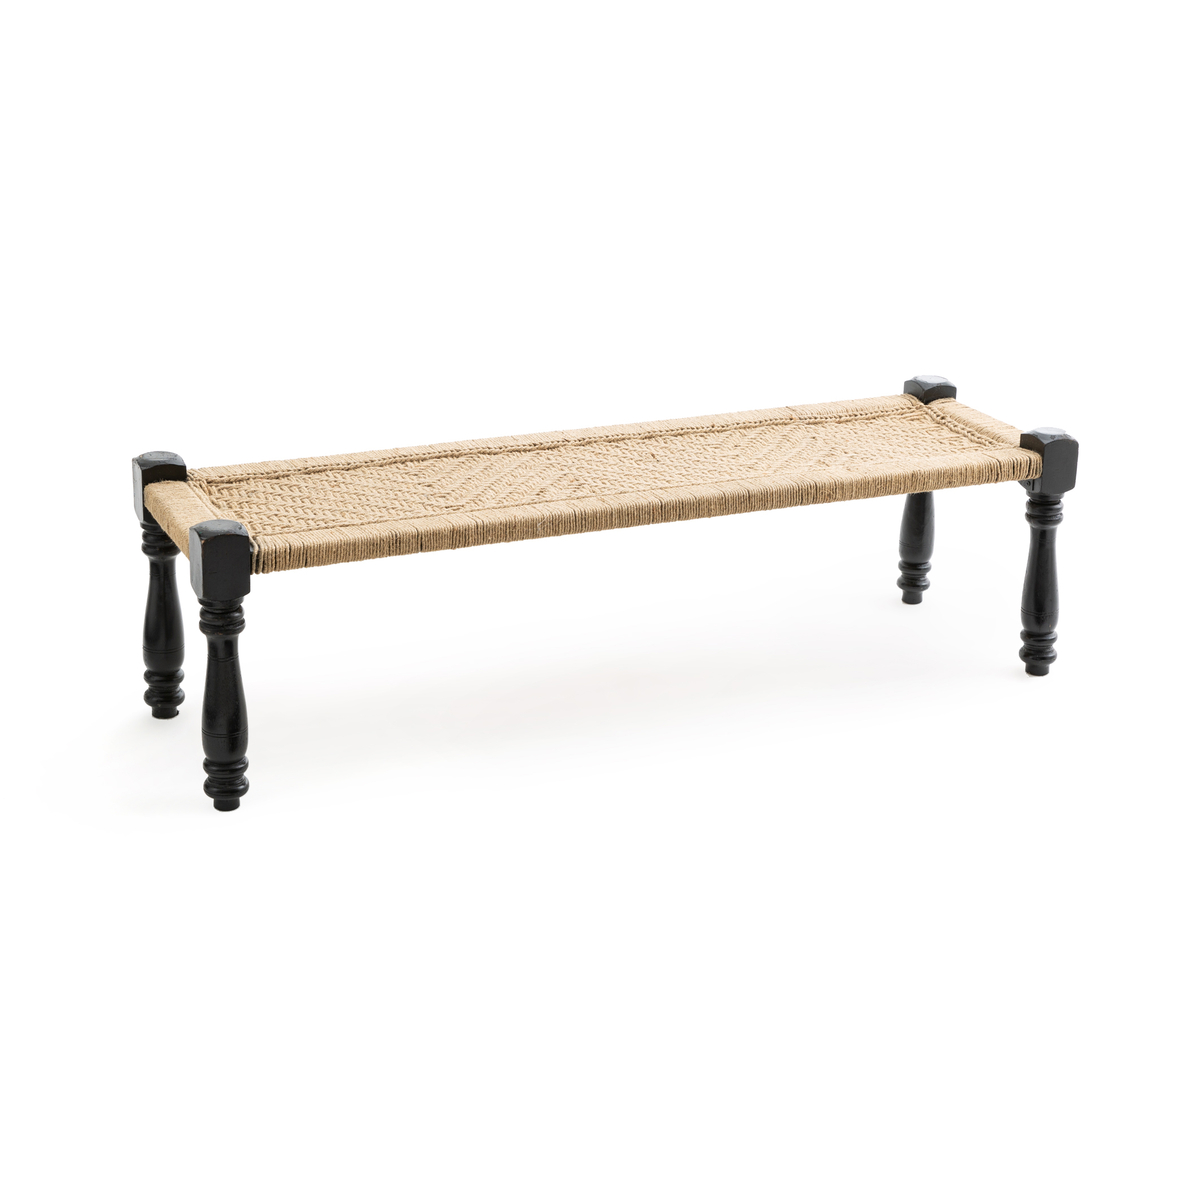 Adas Indian Style Bench In Mango Wood Rope